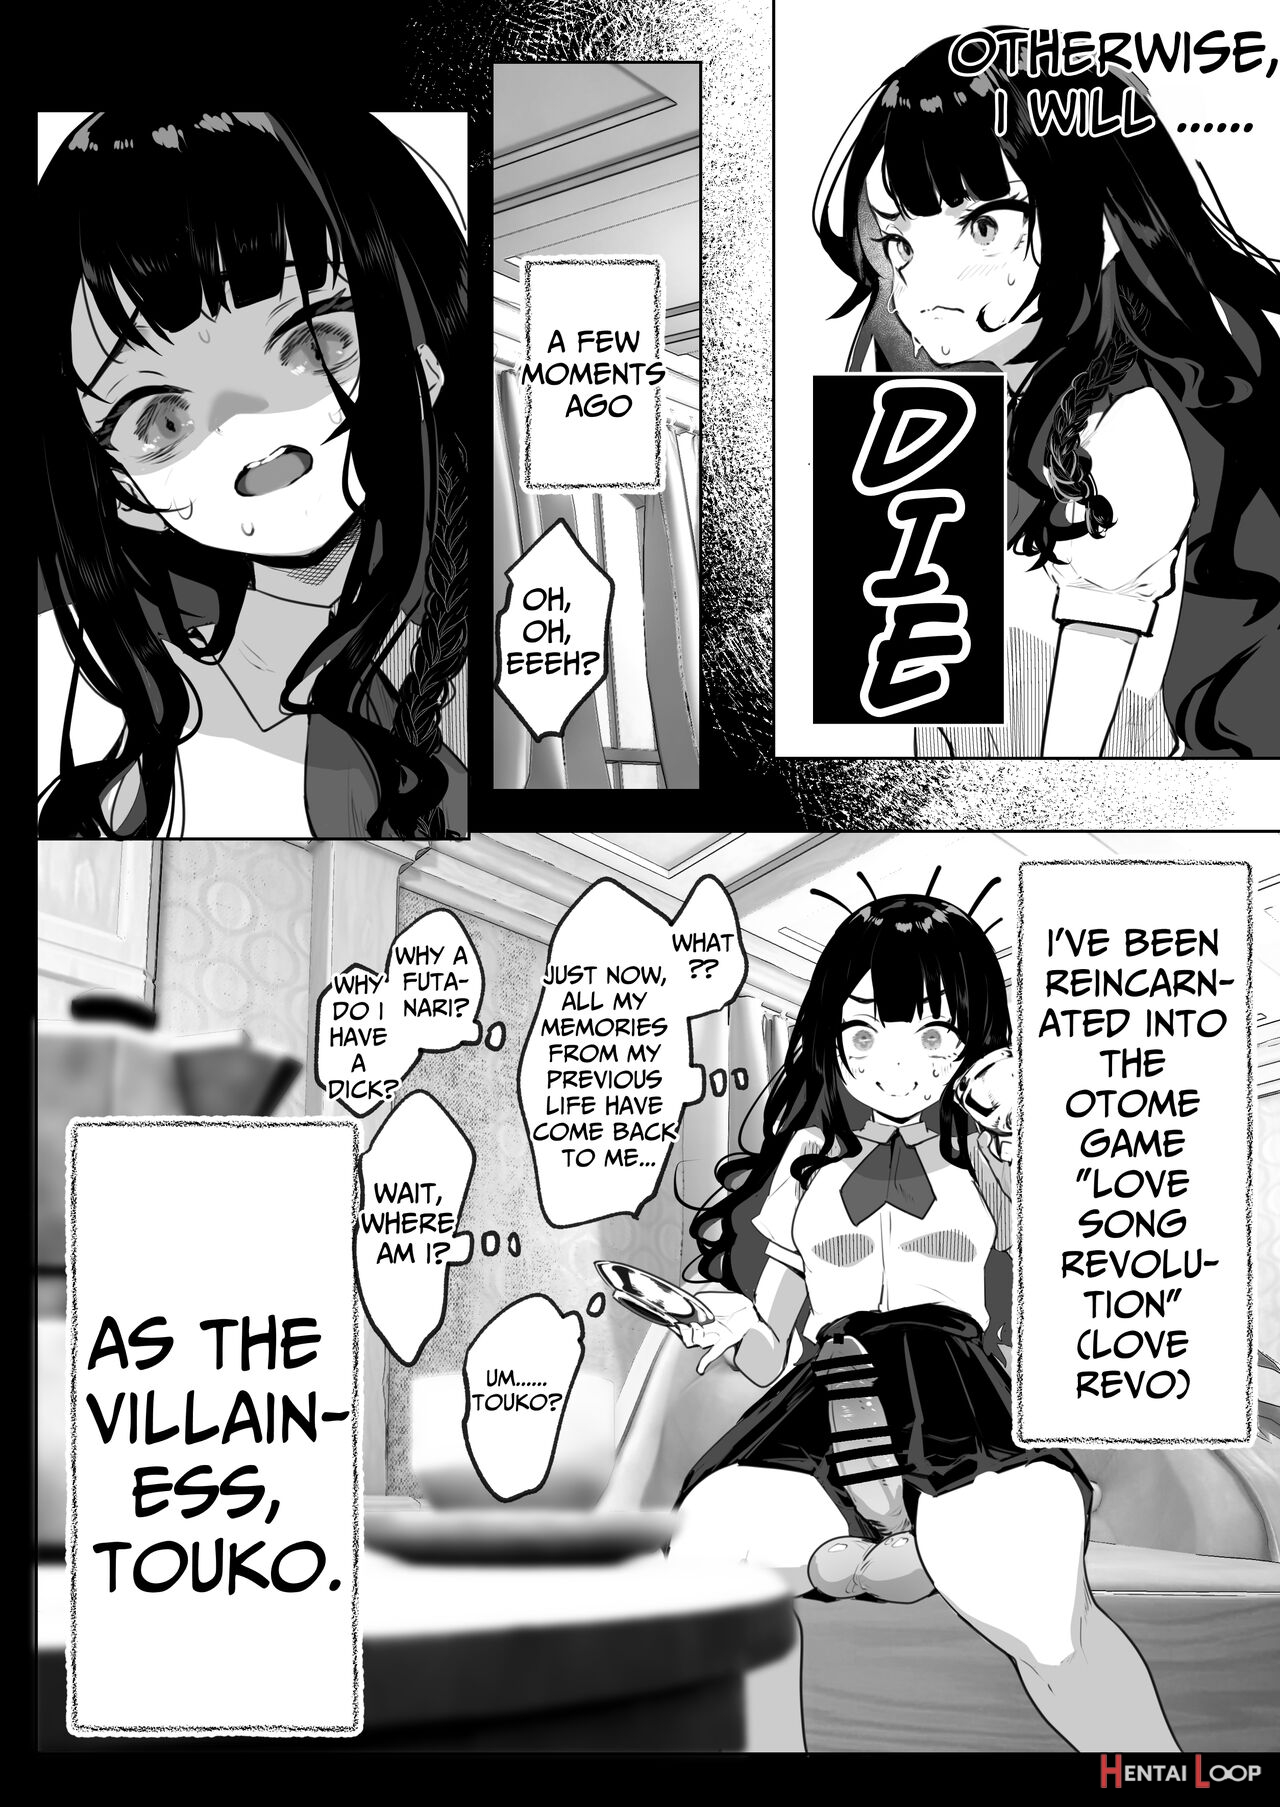 I've Been Reincarnated As A Futanari Villainess, So I'm Conquering The Heroine Of The Otome Game page 5